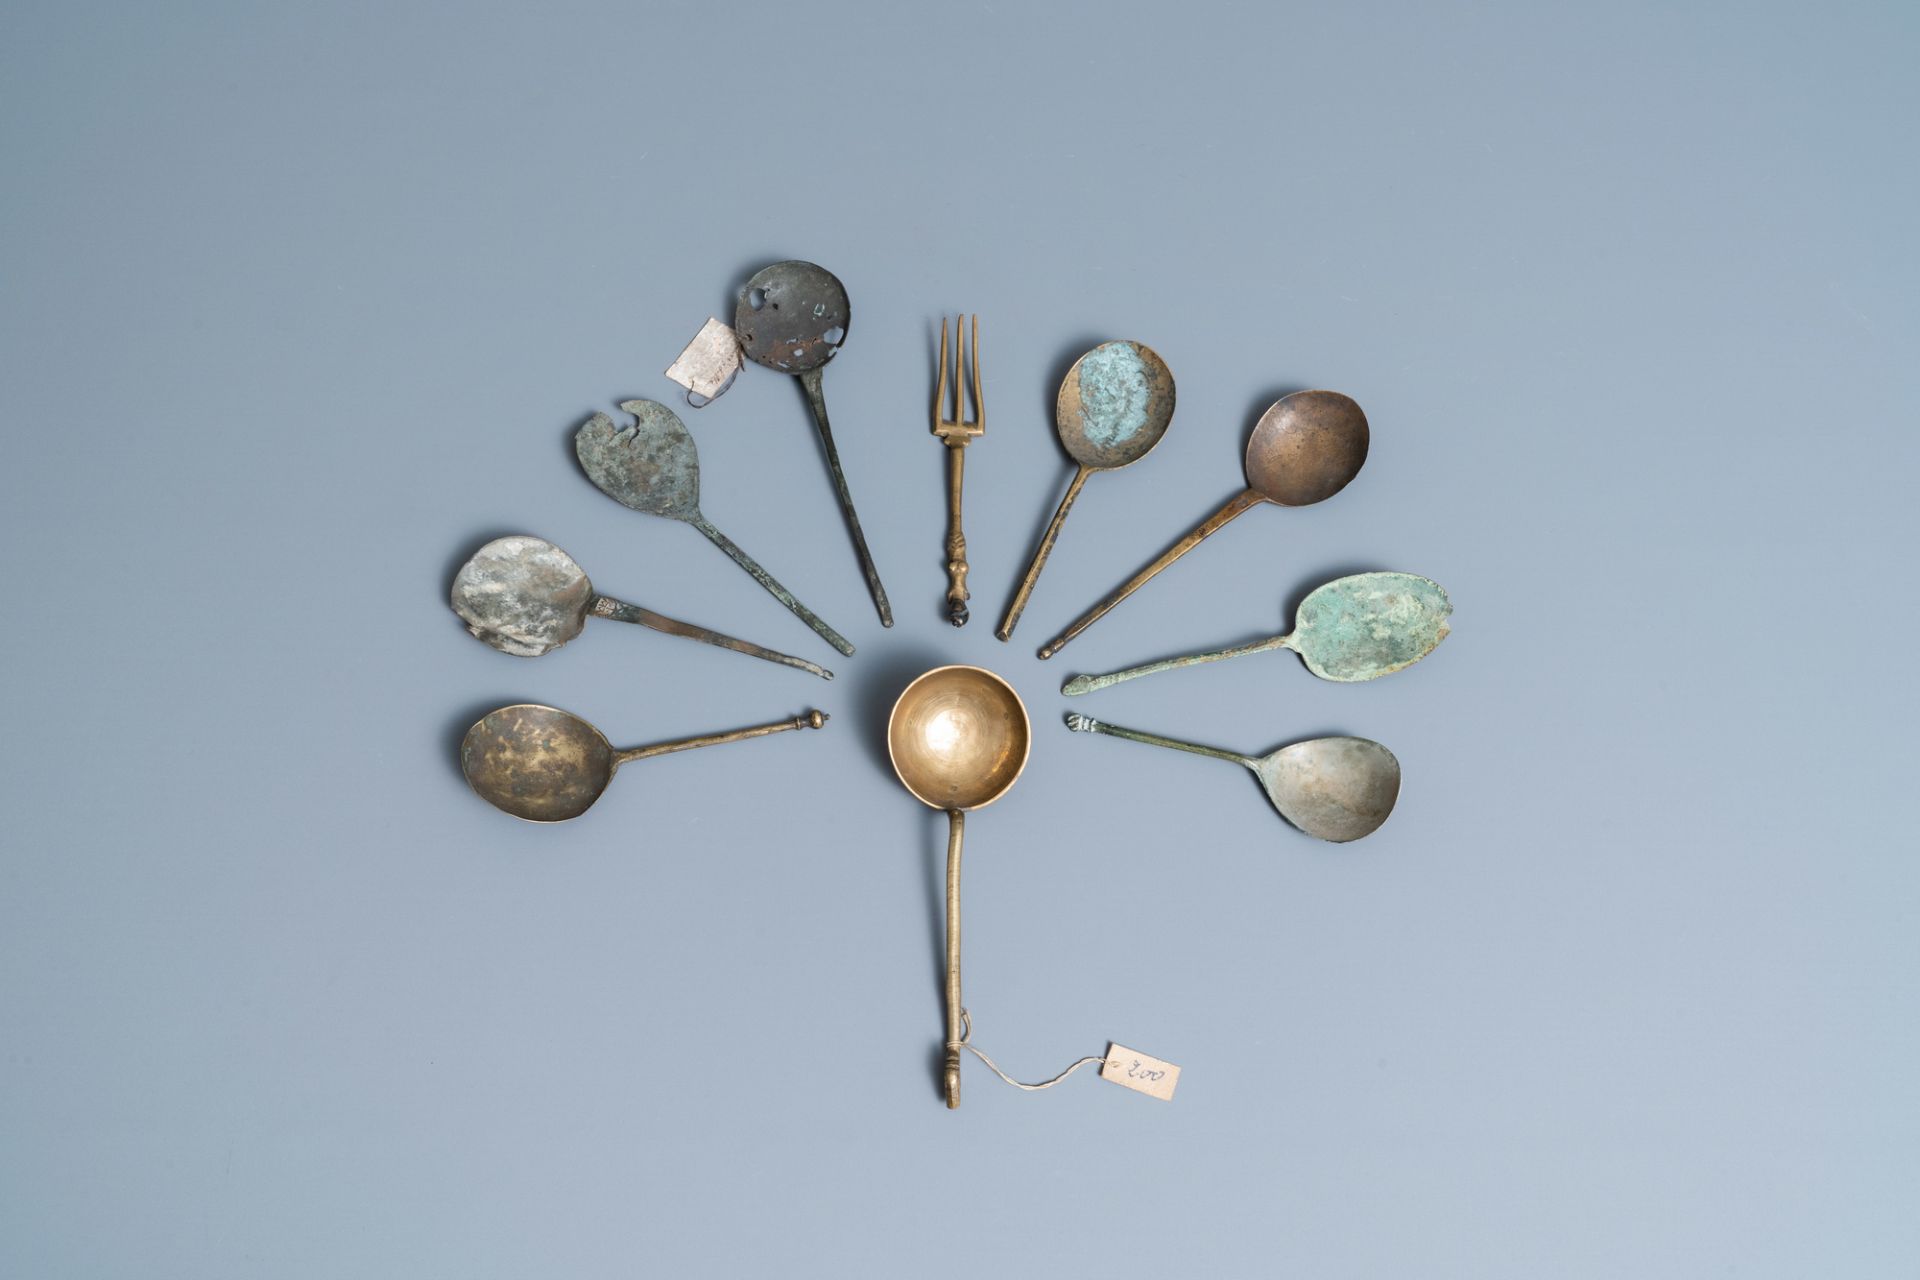 Nine brass spoons and a small fork, 15/16th C. - Image 2 of 4